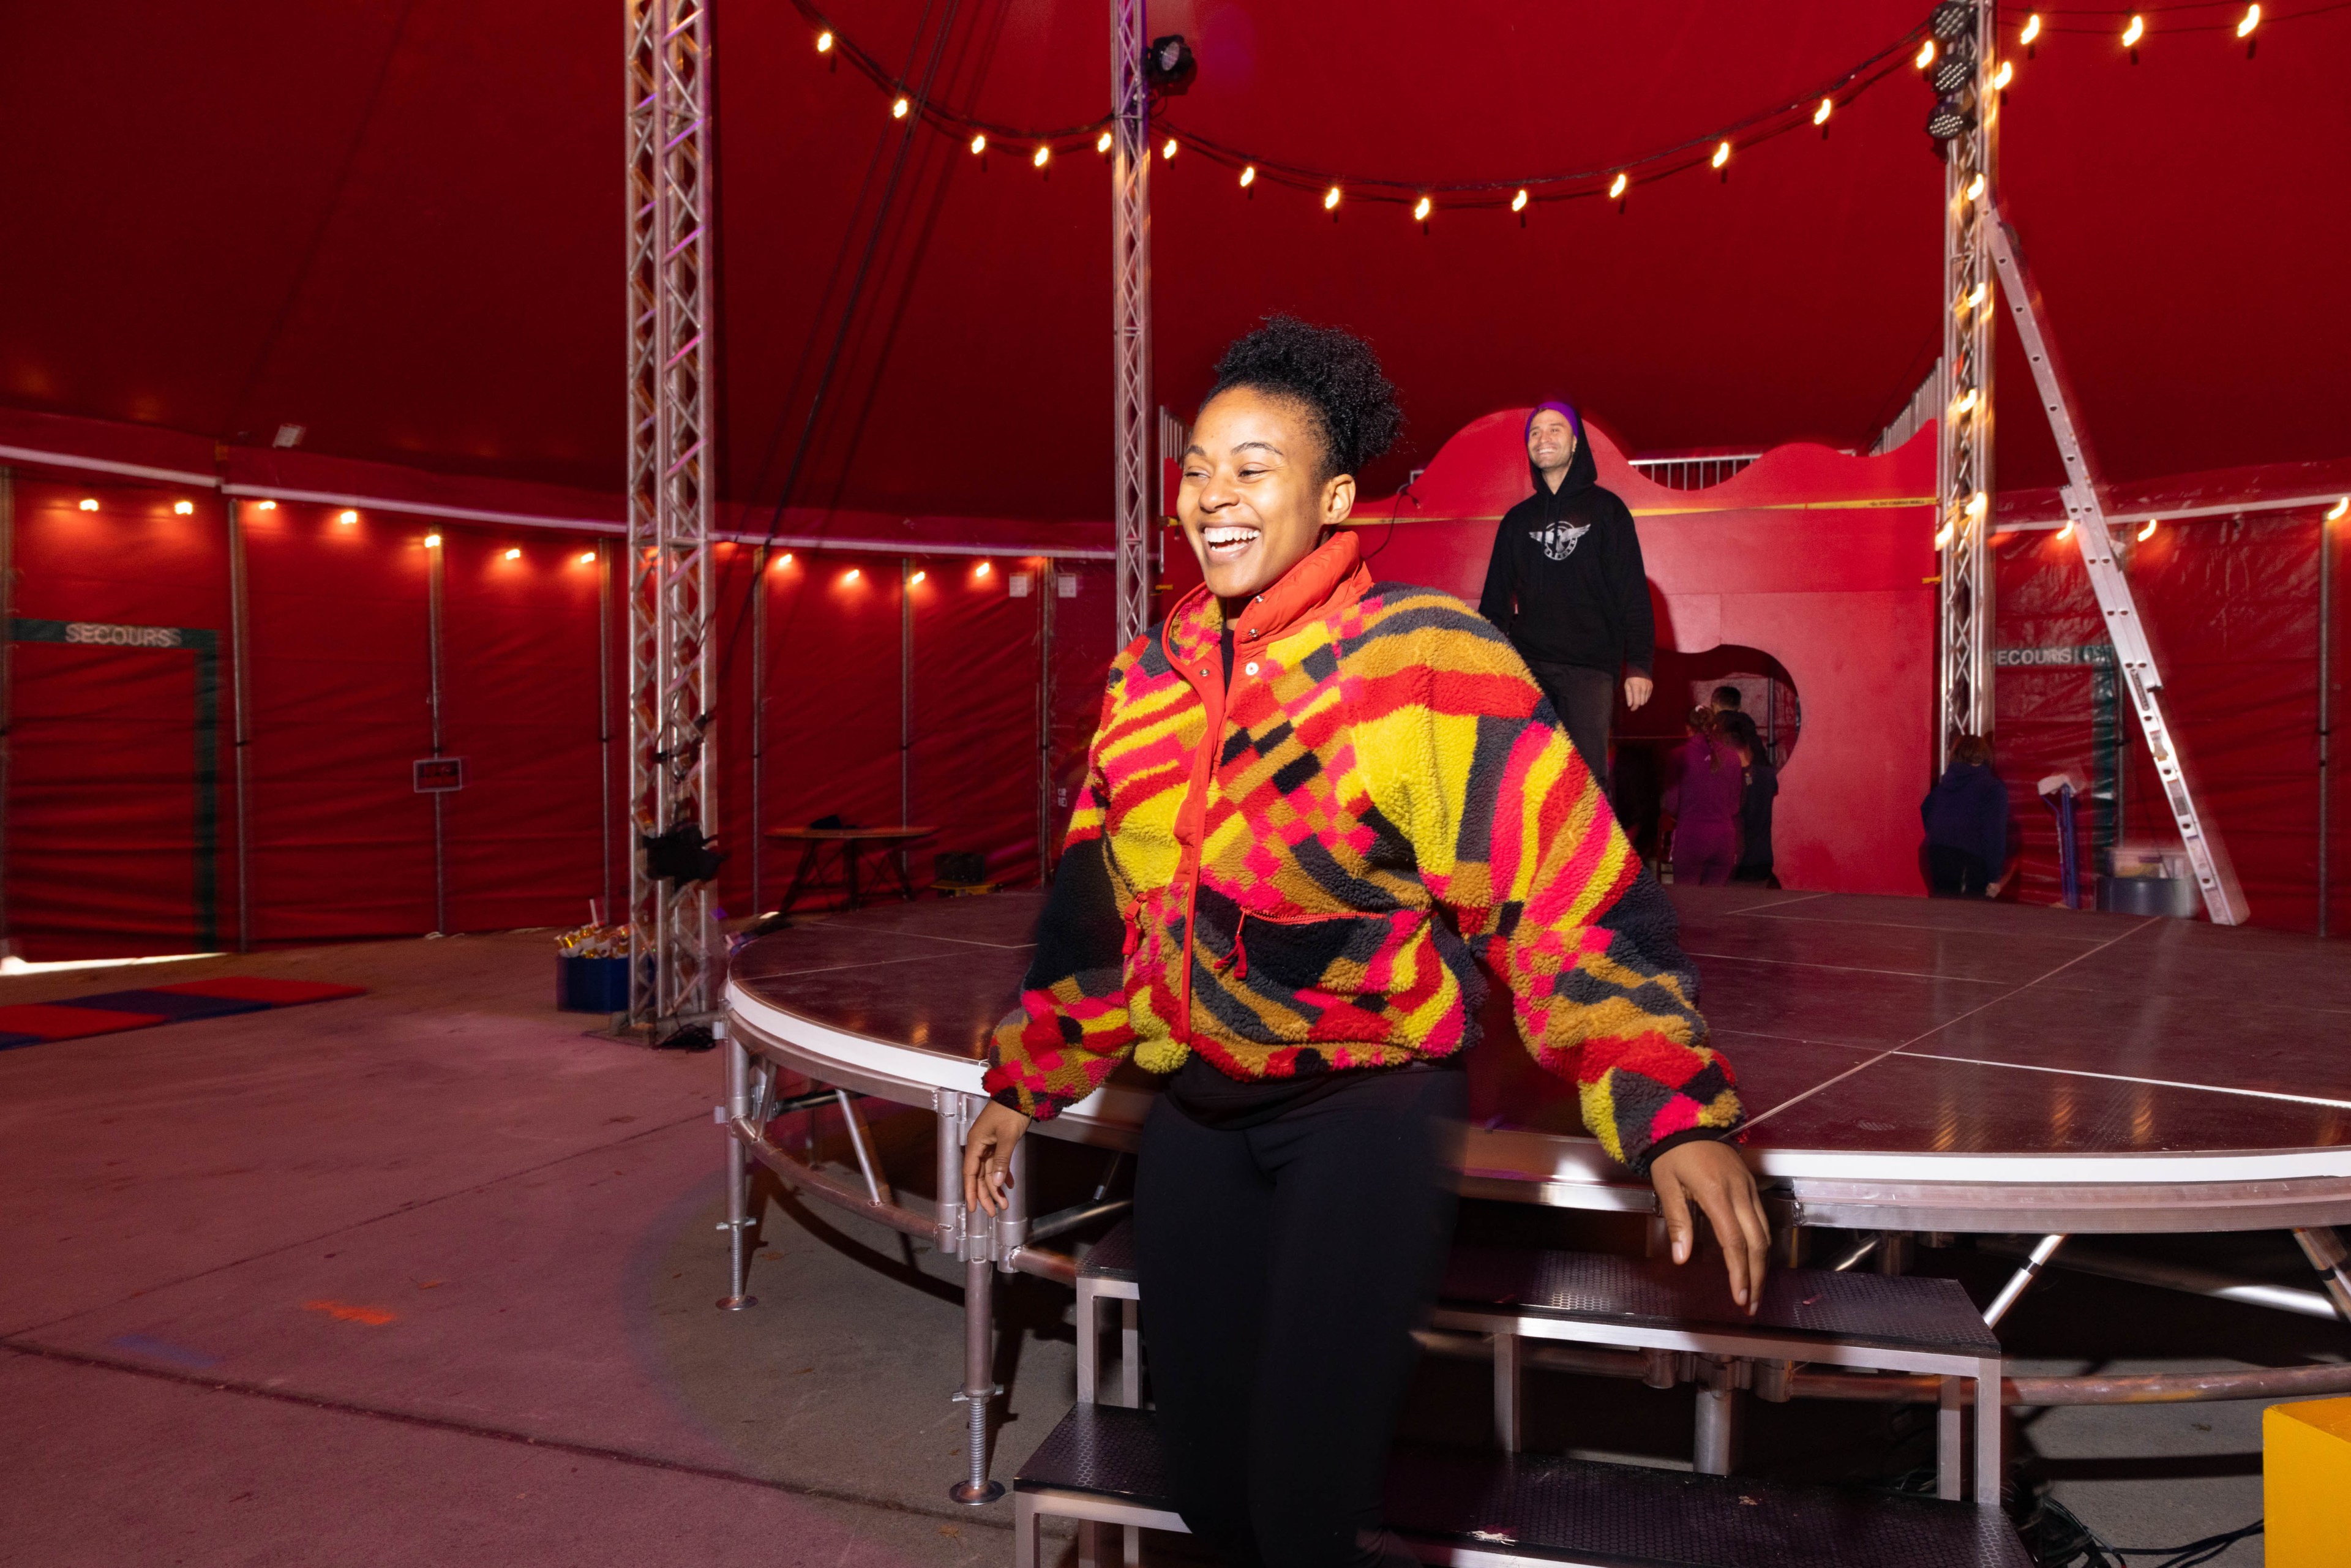 A person smiles inside a tent during circus practice.